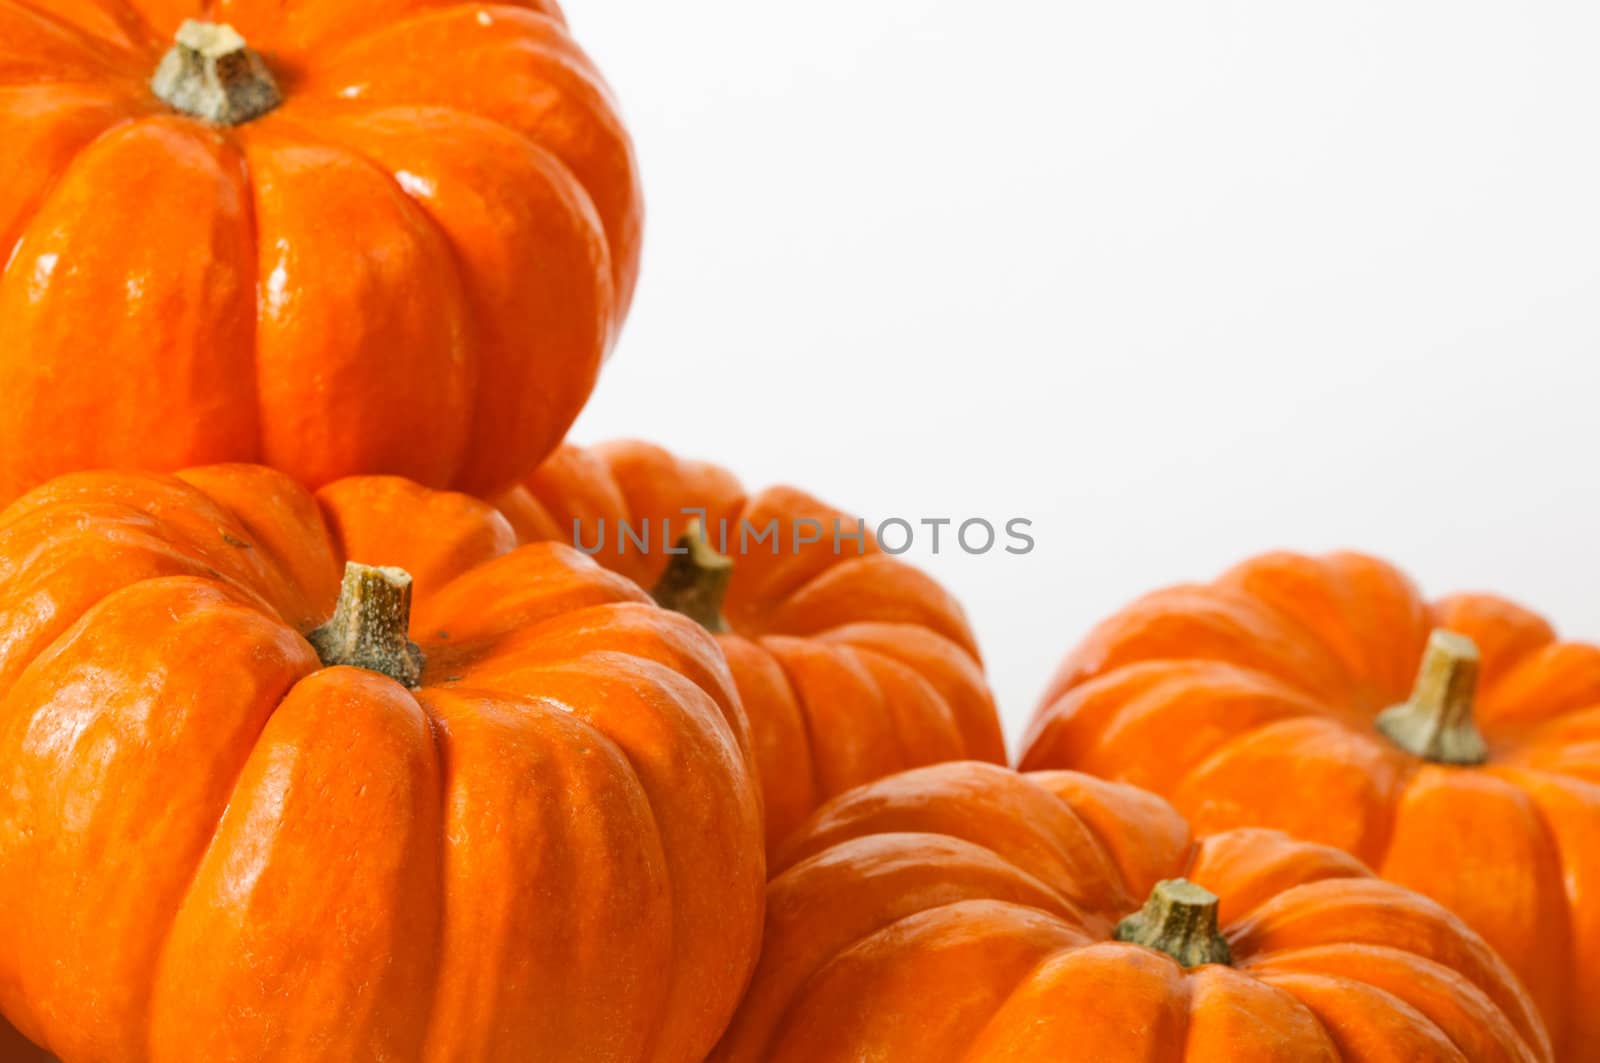 Close up composition of pumpkins on a white background.